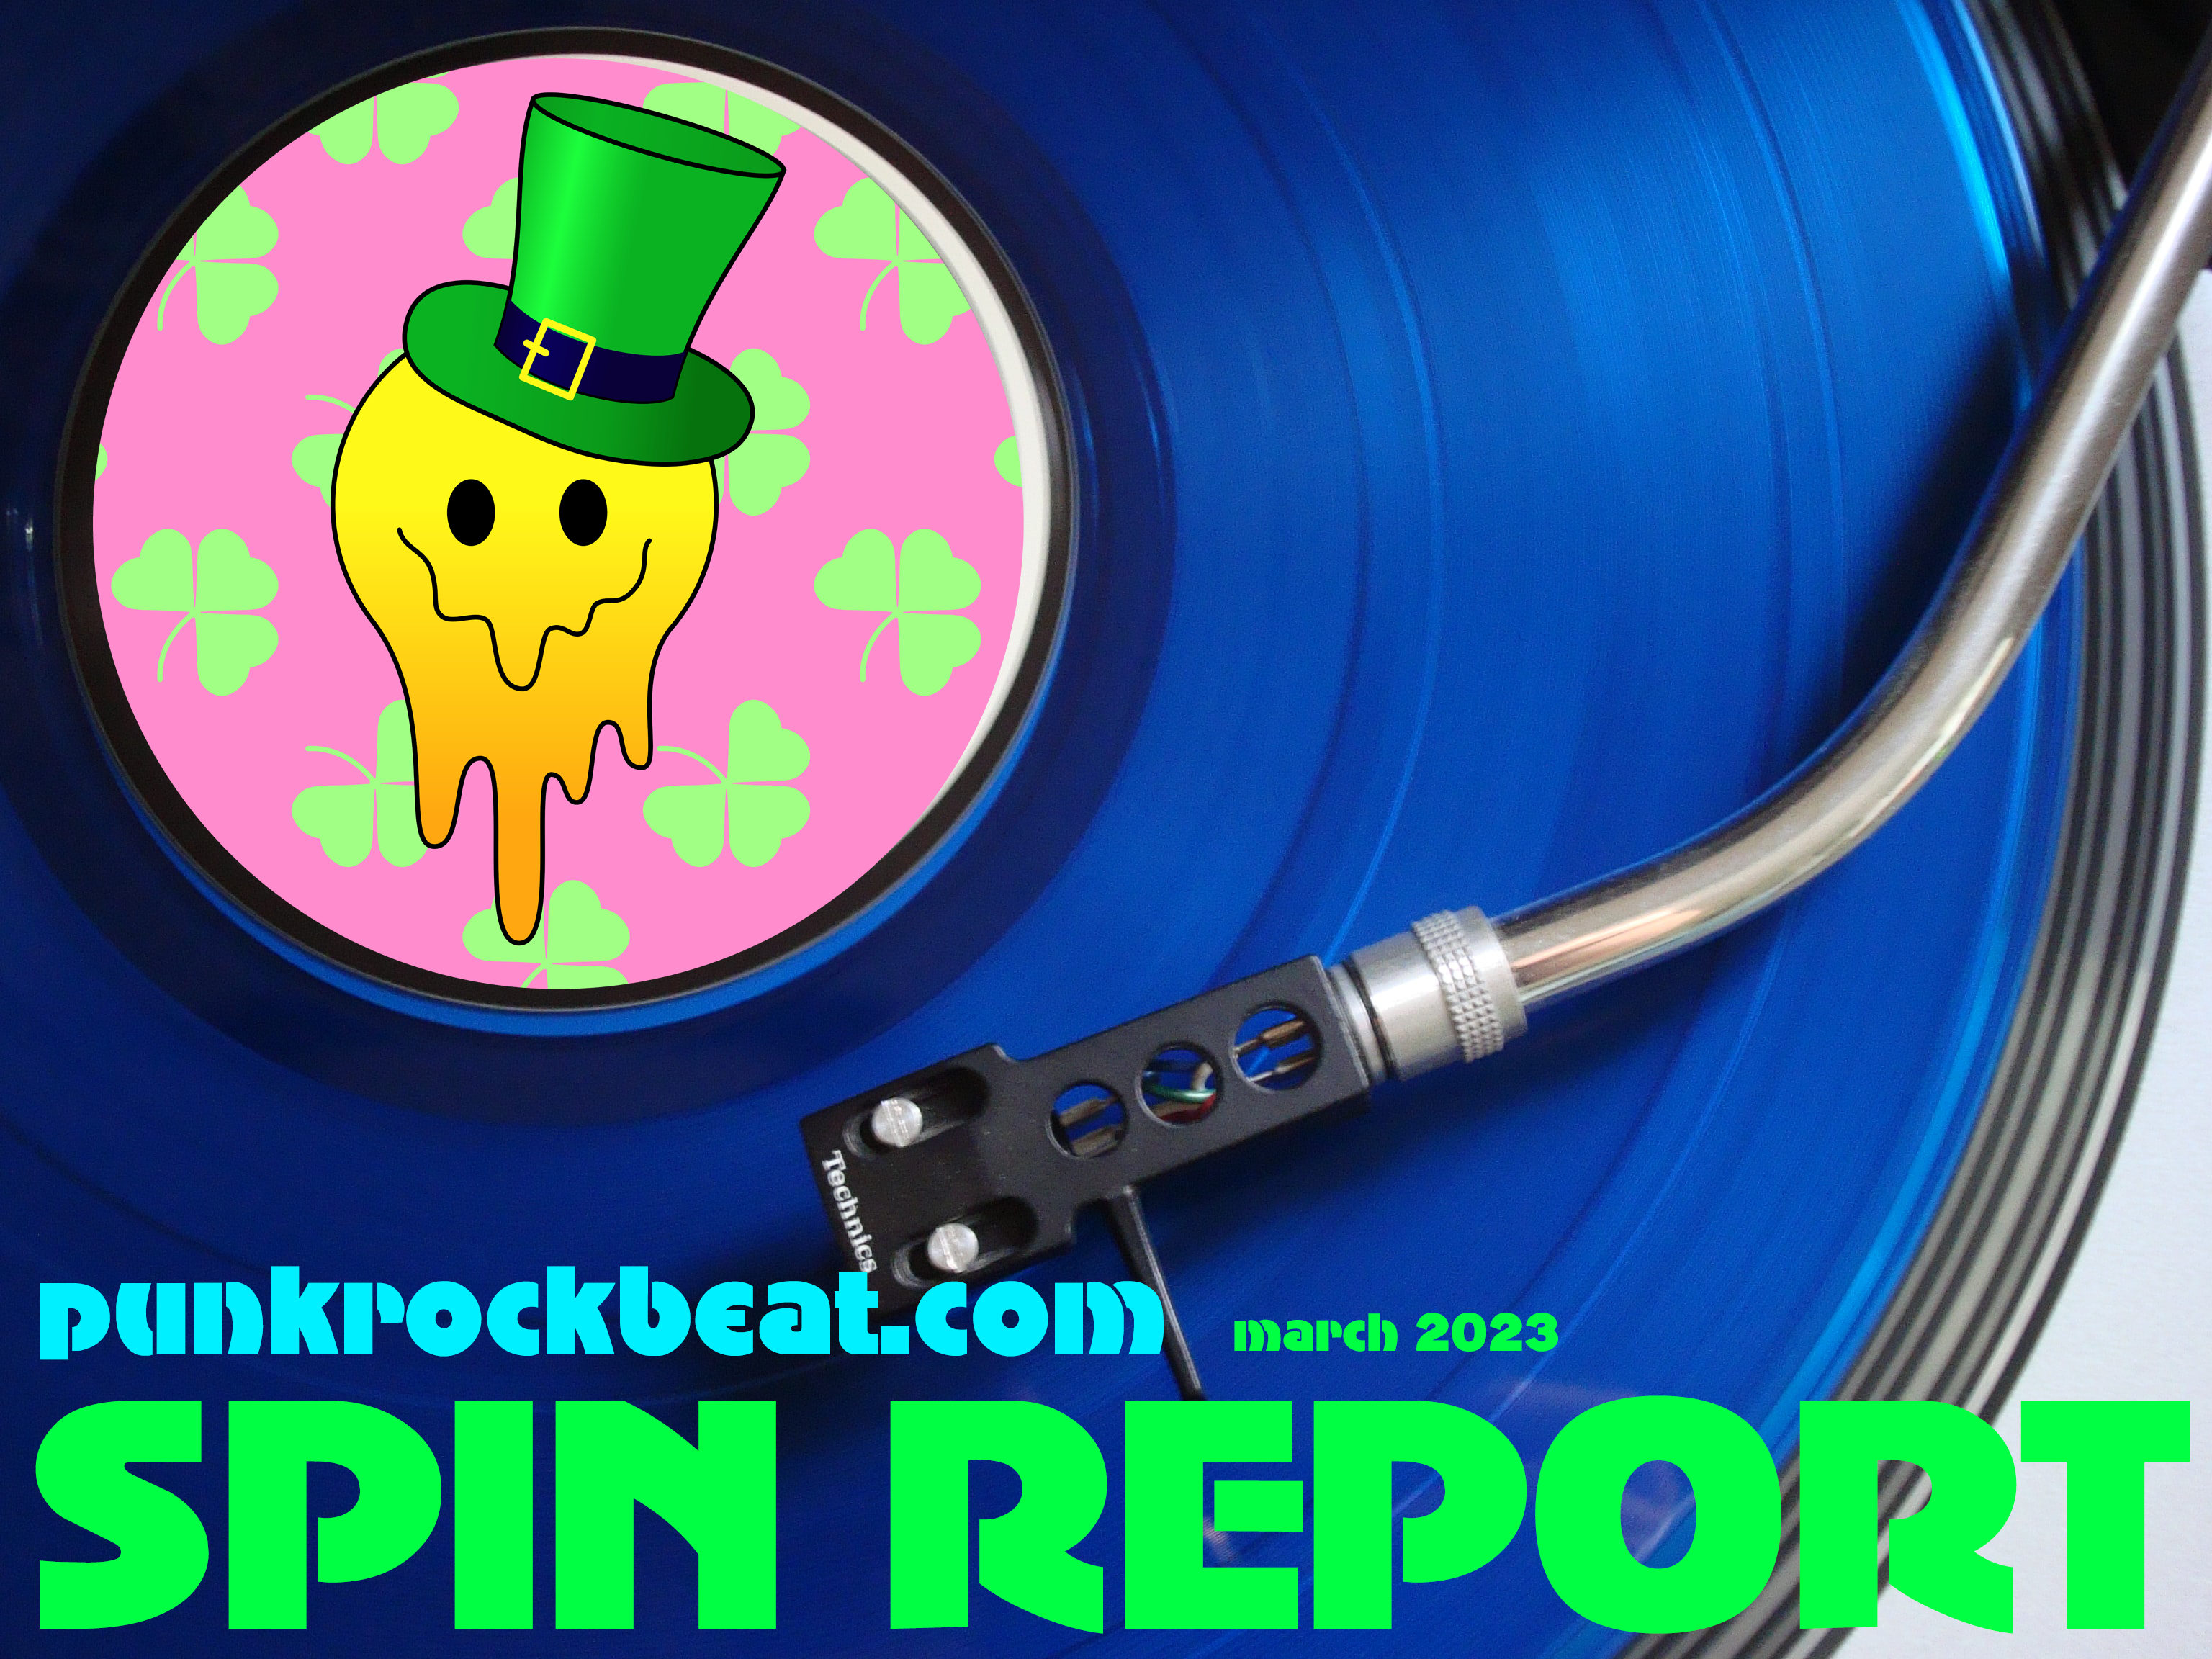 Punk rock’s influence on later generations is found in music that combines lots of loud guitar with various innovations. This month’s Spin Report features new releases with roots in that original loud and raucous explosion while featuring some new electronic sounds and production as well.